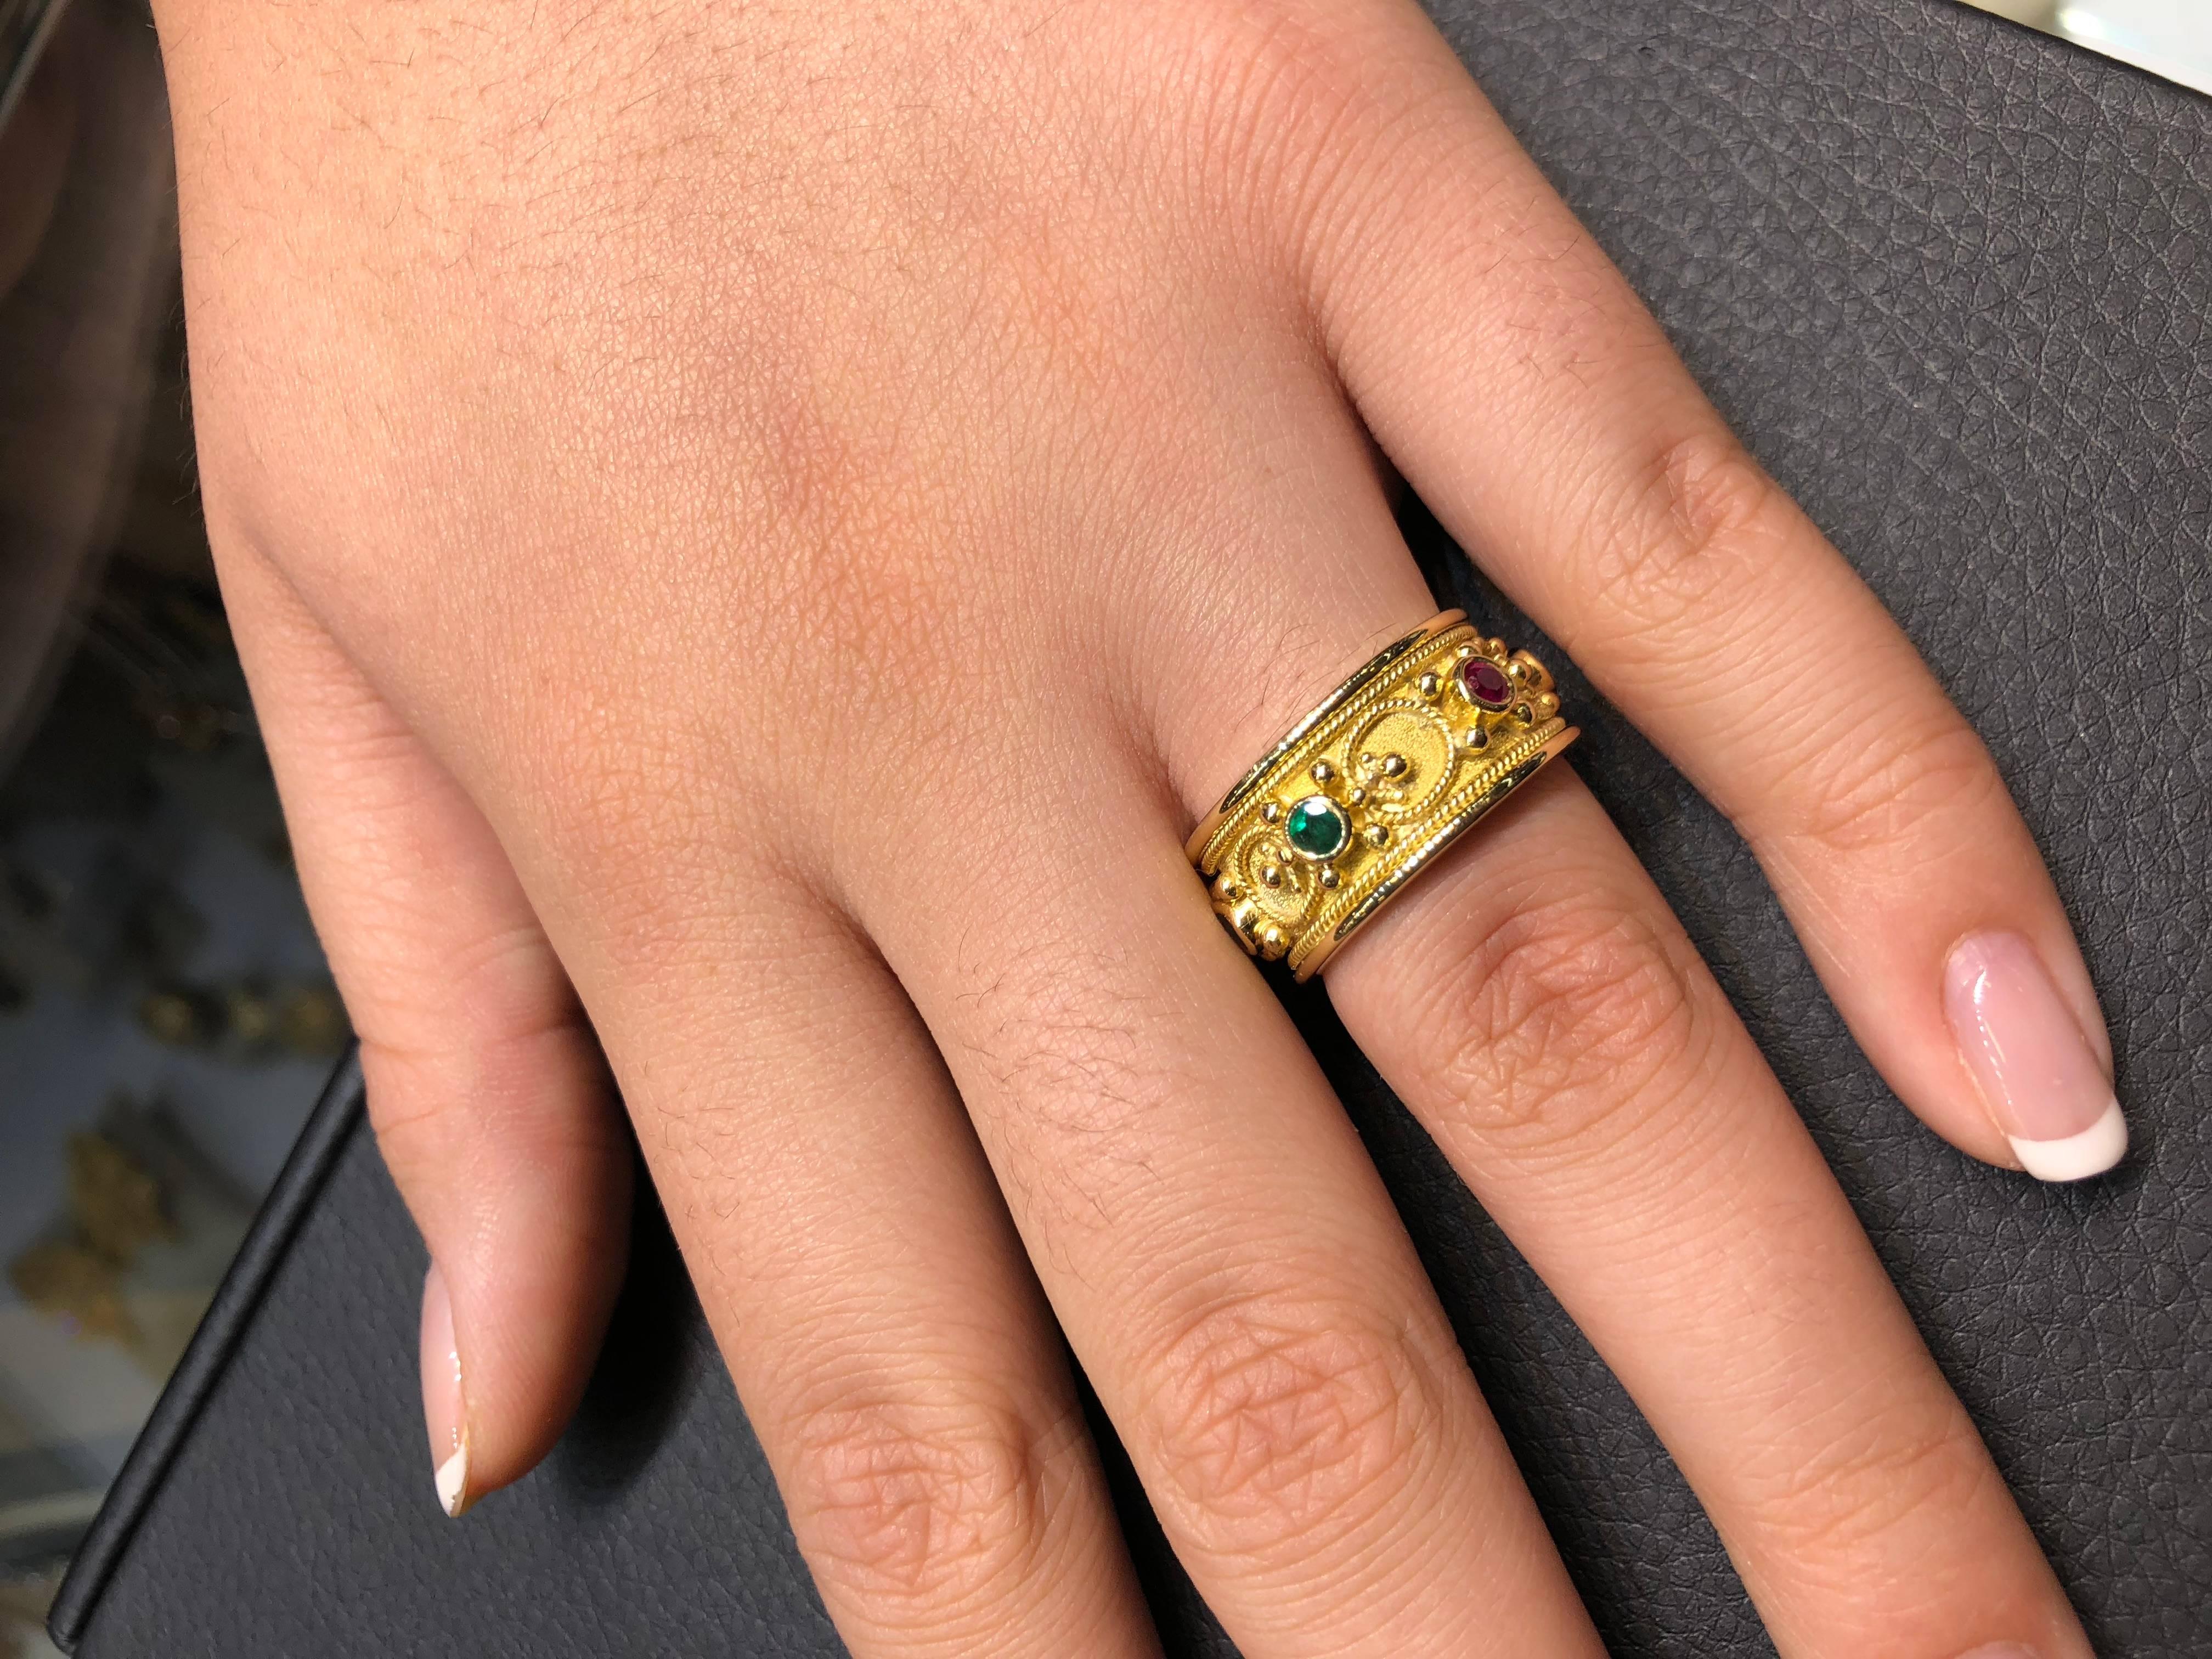 S.Georgios design ring handmade from solid 18 Karat Yellow Gold. The ring is microscopically decorated - granulation work - all the way around with gold beads and wires shaped as the last letter of Greek Alphabet - Omega, which symbolizes eternal